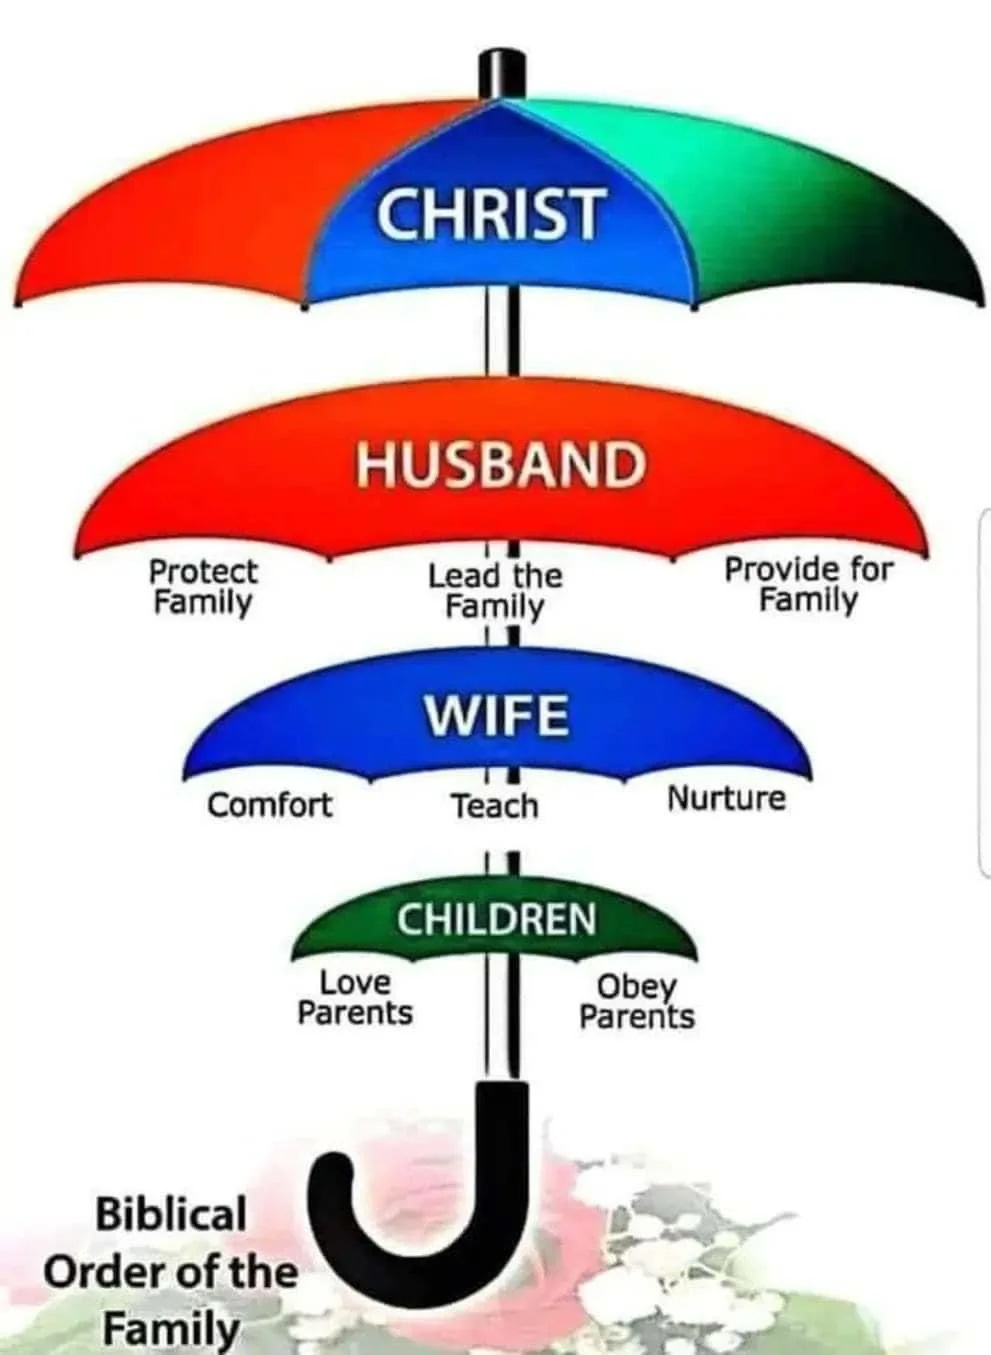 Chart showing Biblical order of the family as a series of umbrellas starting with Christ, above Husband, above Wife, above Children